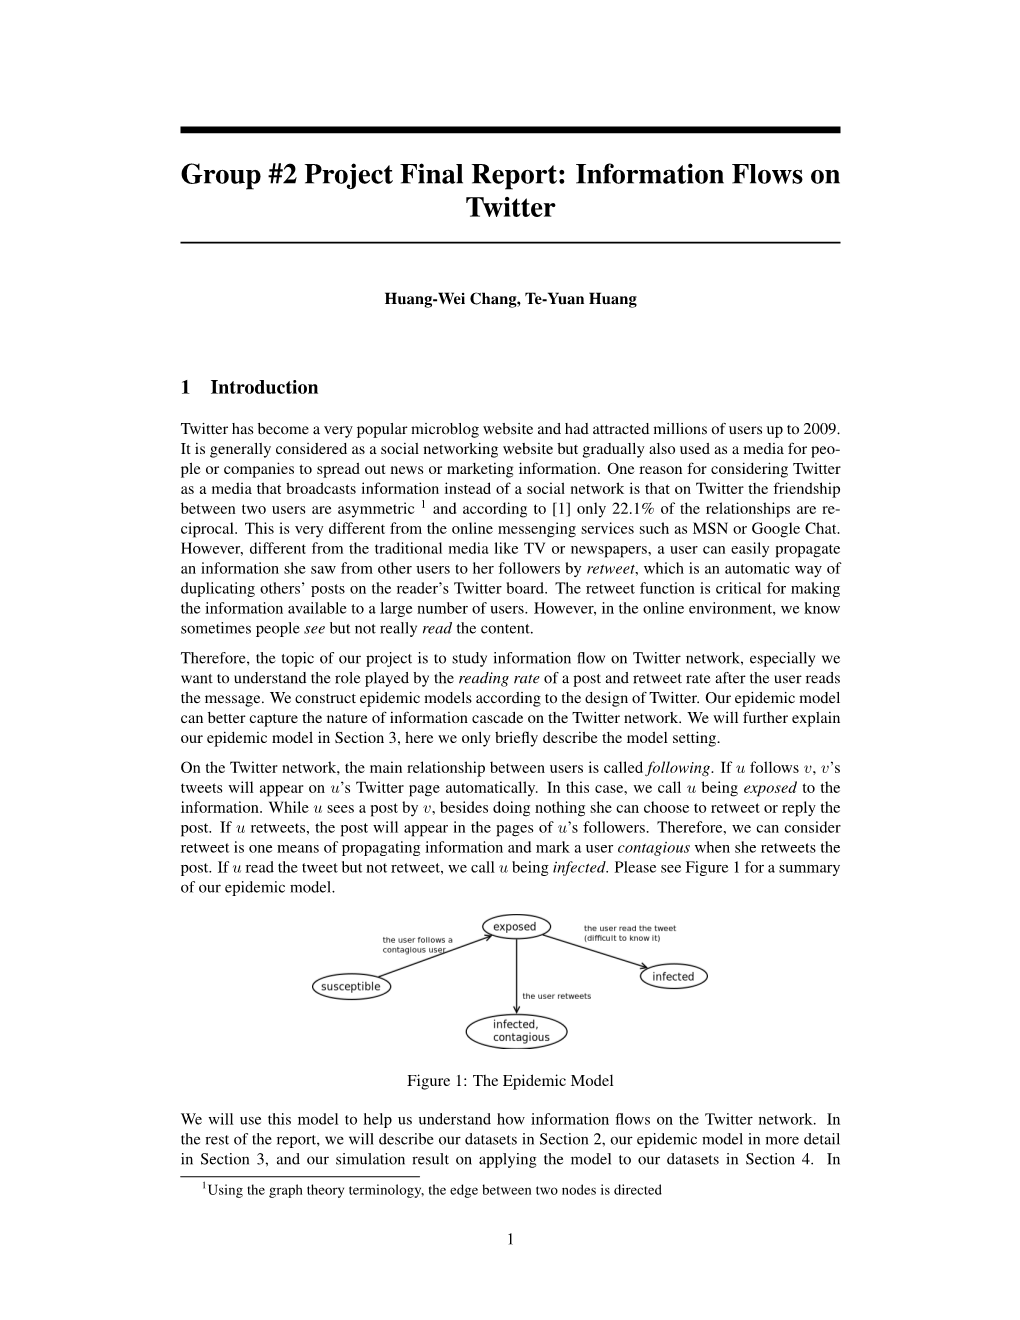 Group #2 Project Final Report: Information Flows on Twitter